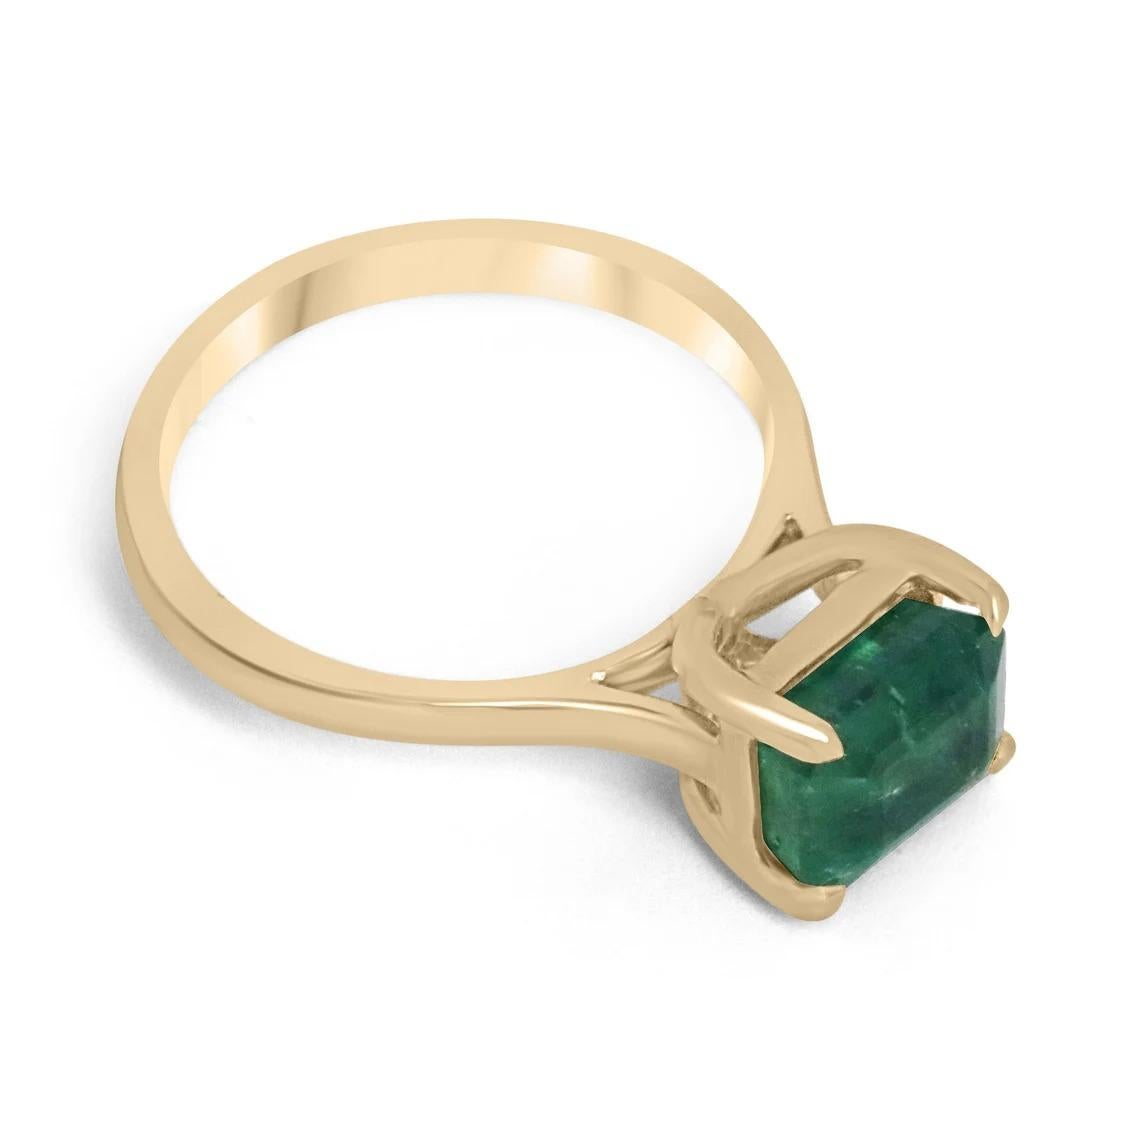 Displayed is a lovely solitaire emerald ring. This charming piece carries a stunning two-and-a-half carat natural emerald from the origin of Zambia. The gemstone displays a rich medium-dark green color with good transparency and eye-catching luster.